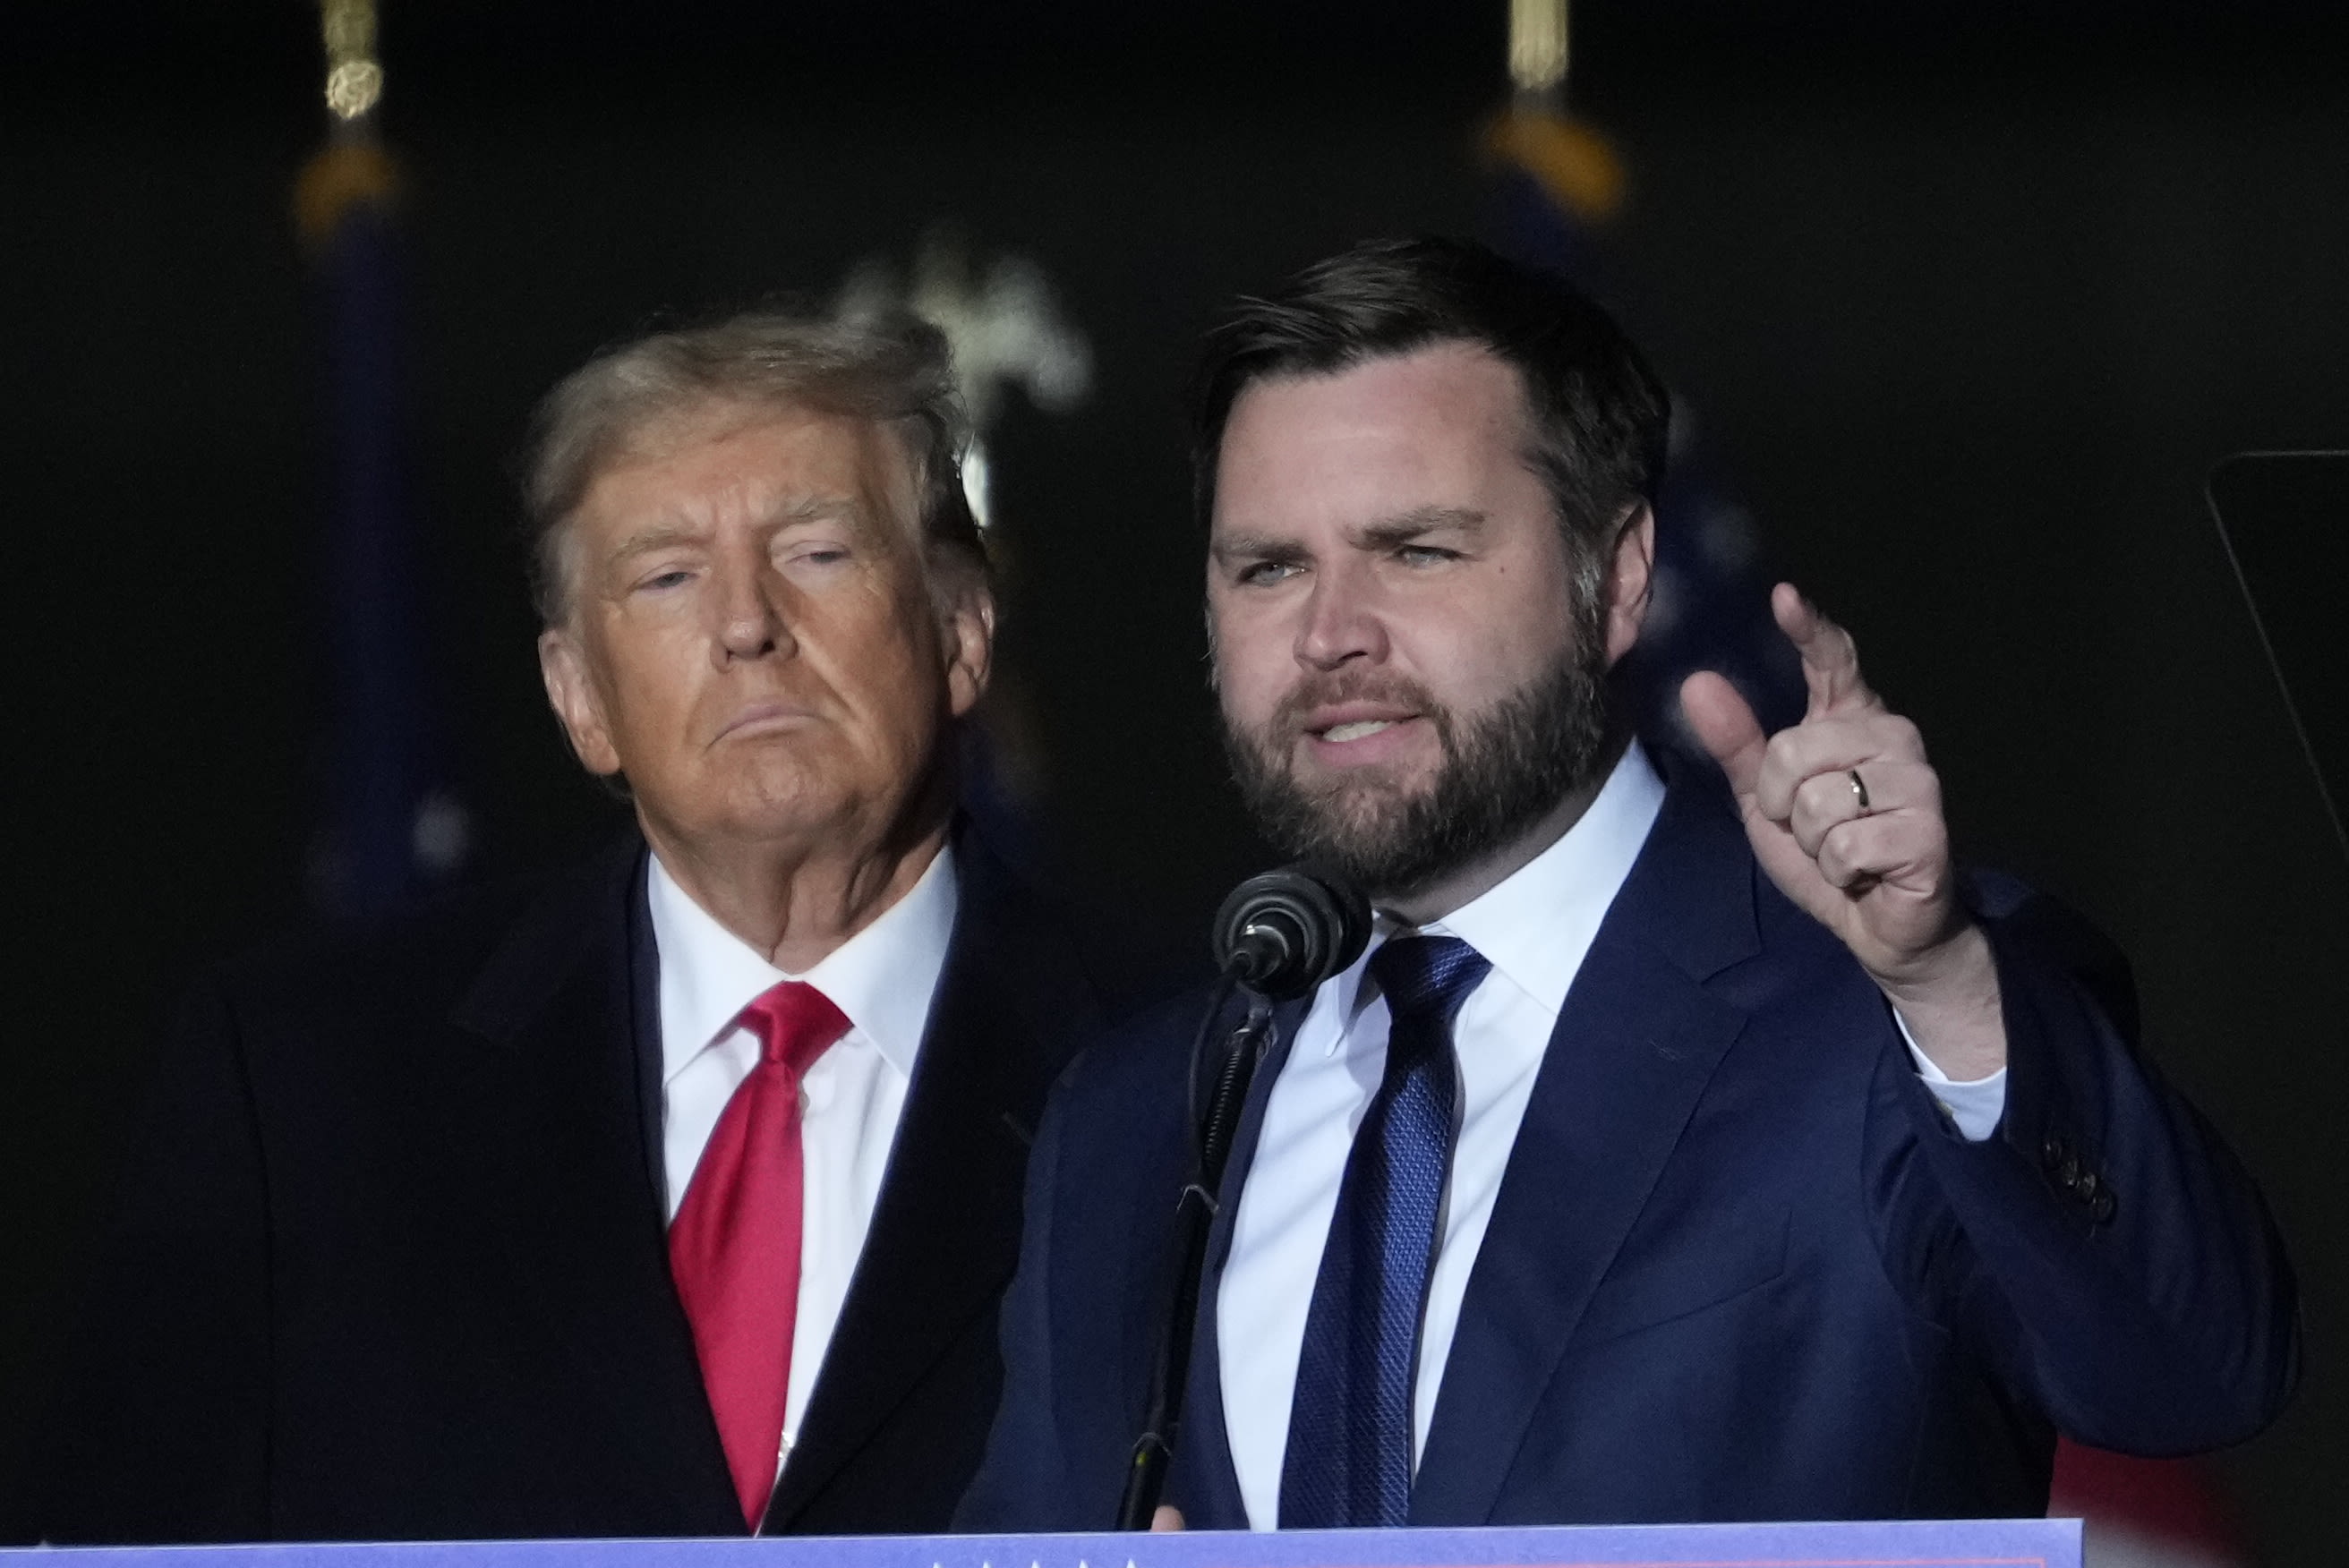 J.D. Vance could "outshine" Trump as vice president, ex-aide warns